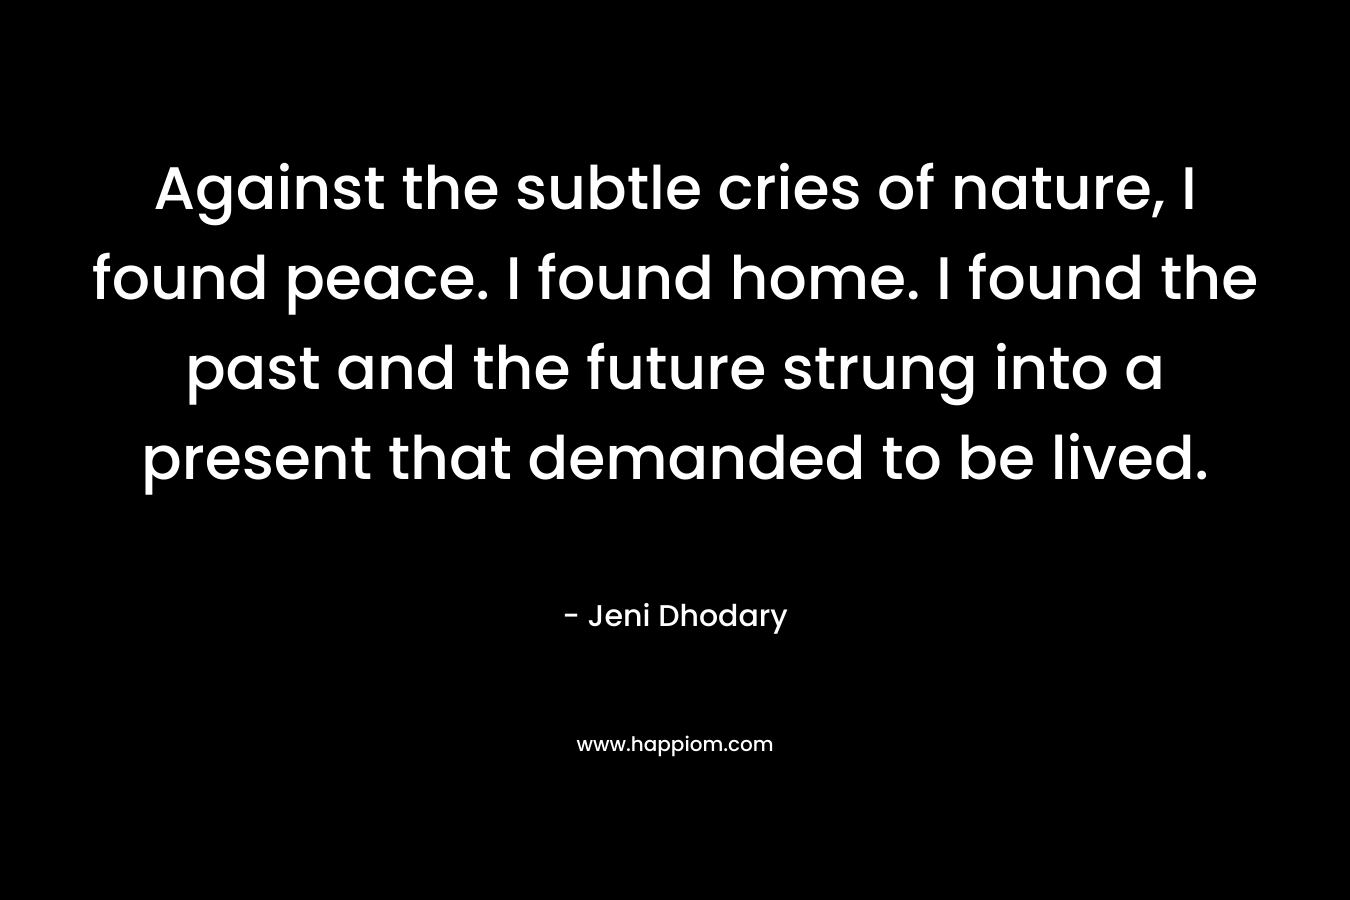 Against the subtle cries of nature, I found peace. I found home. I found the past and the future strung into a present that demanded to be lived. – Jeni Dhodary